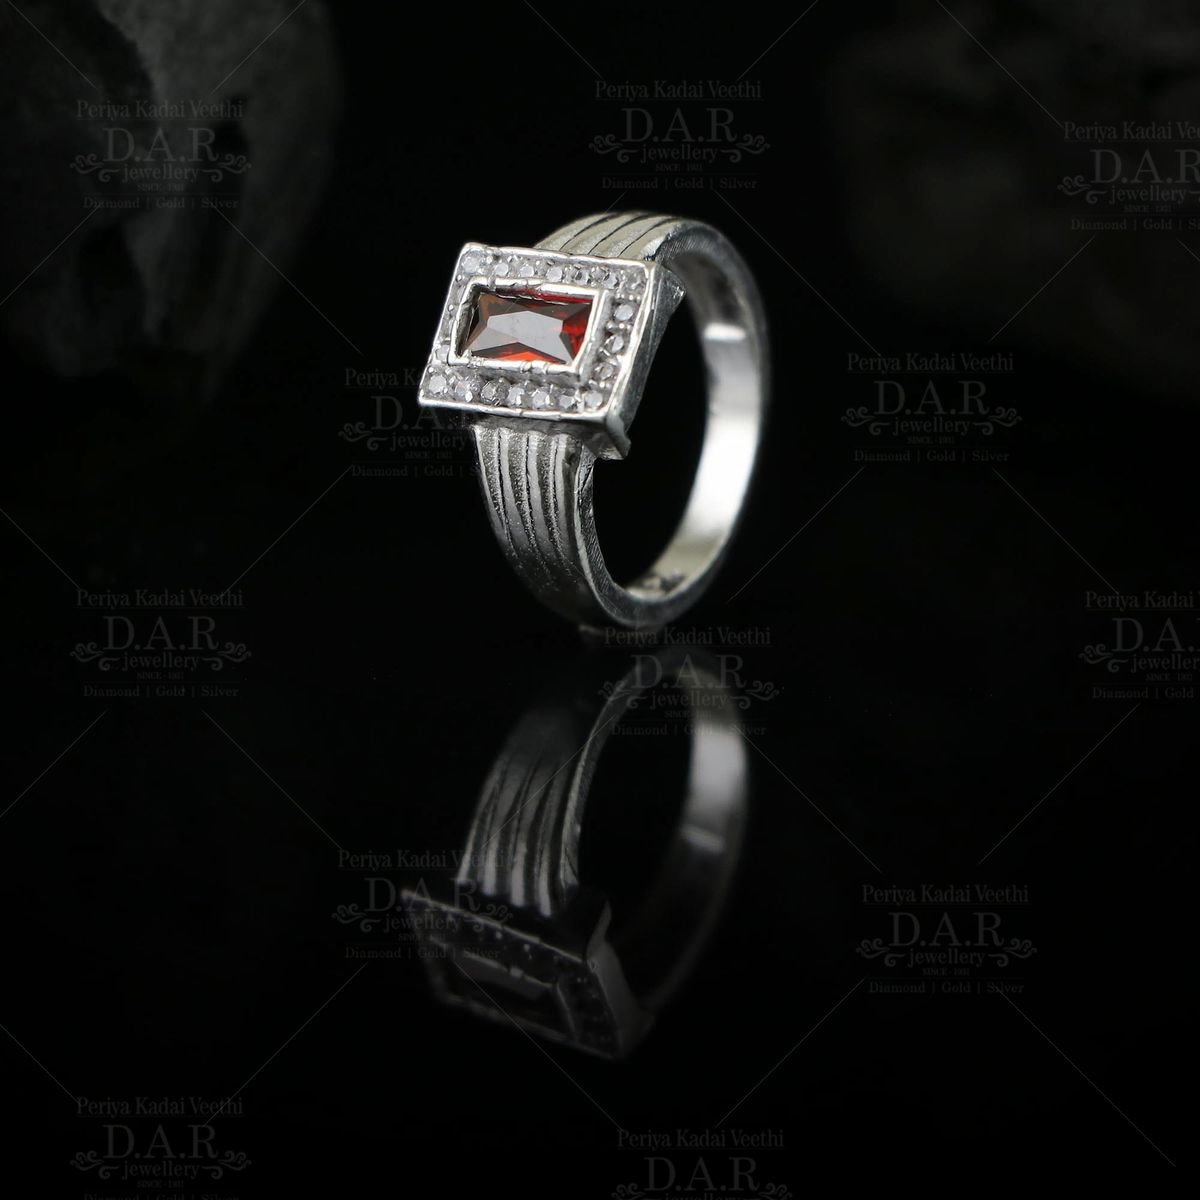 Unique Square Stone Ring Designs for a Stylish Look